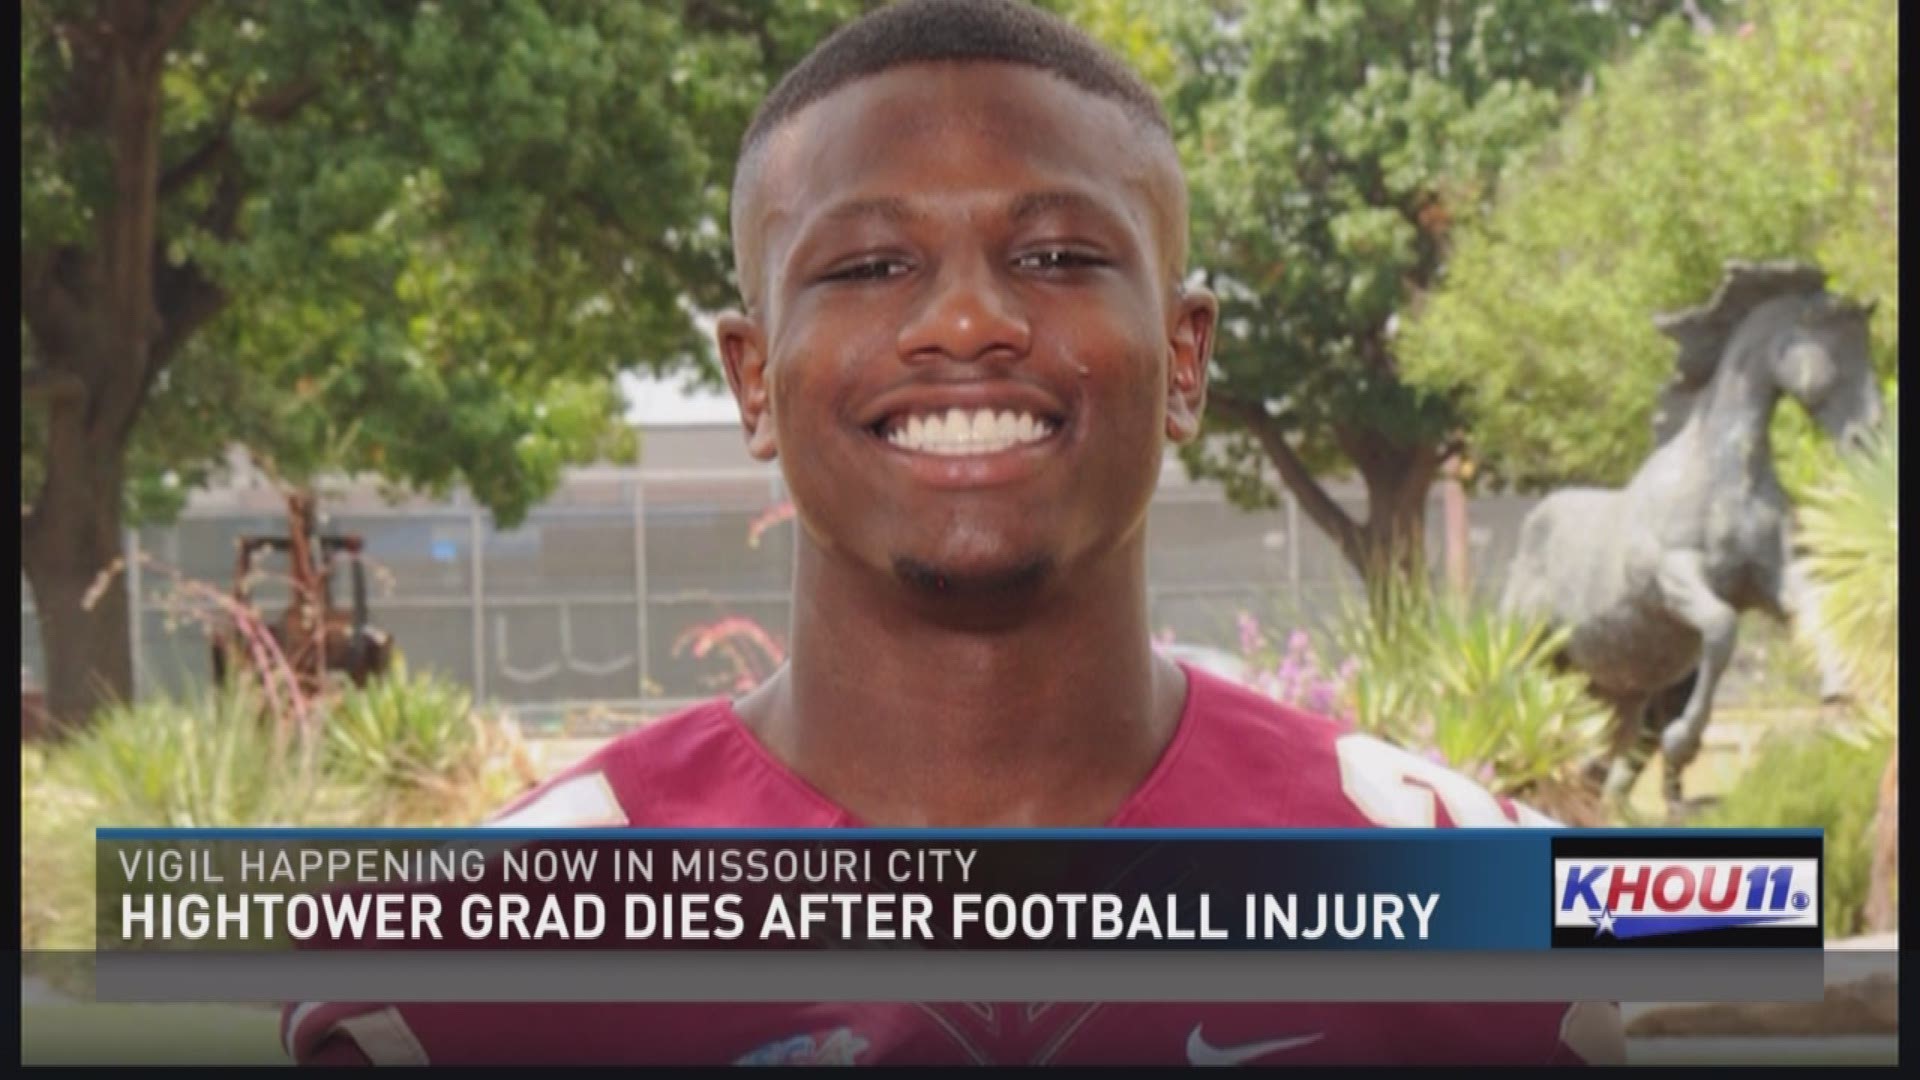 Robert Grays, a local college football player, has died after injuring his neck during a game on Saturday.